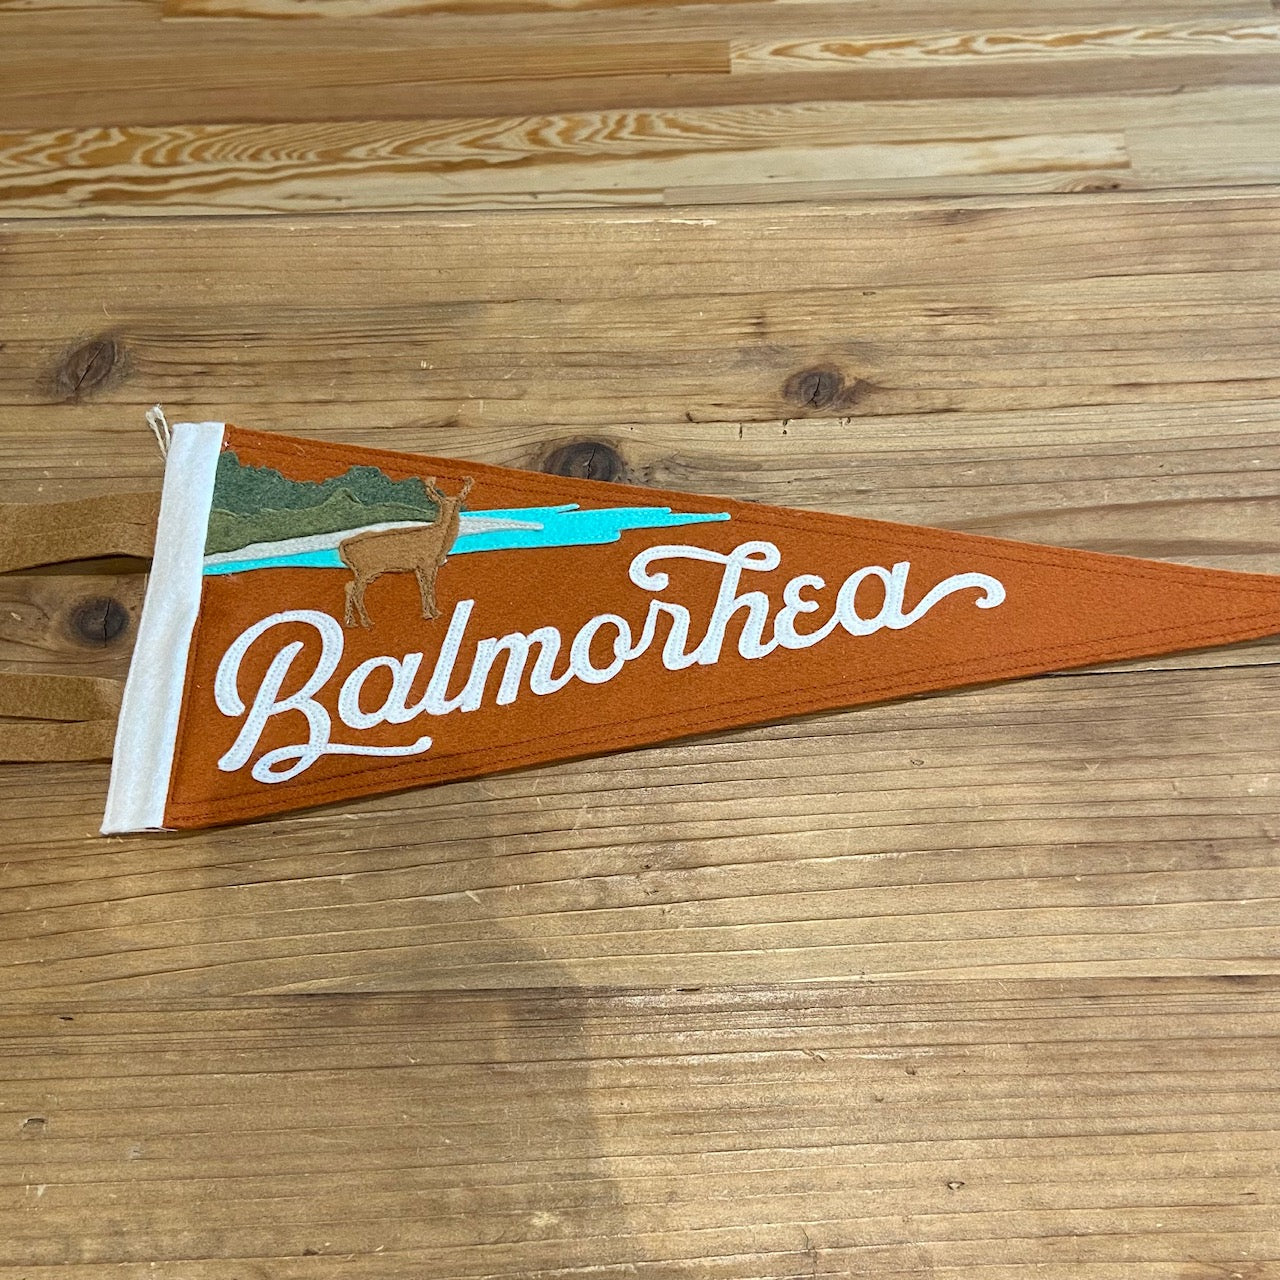 Balmorhea Texas State Park Handmade Felt Pennant at 6Whiskey six whisky in color burnt orange featuring deer and water